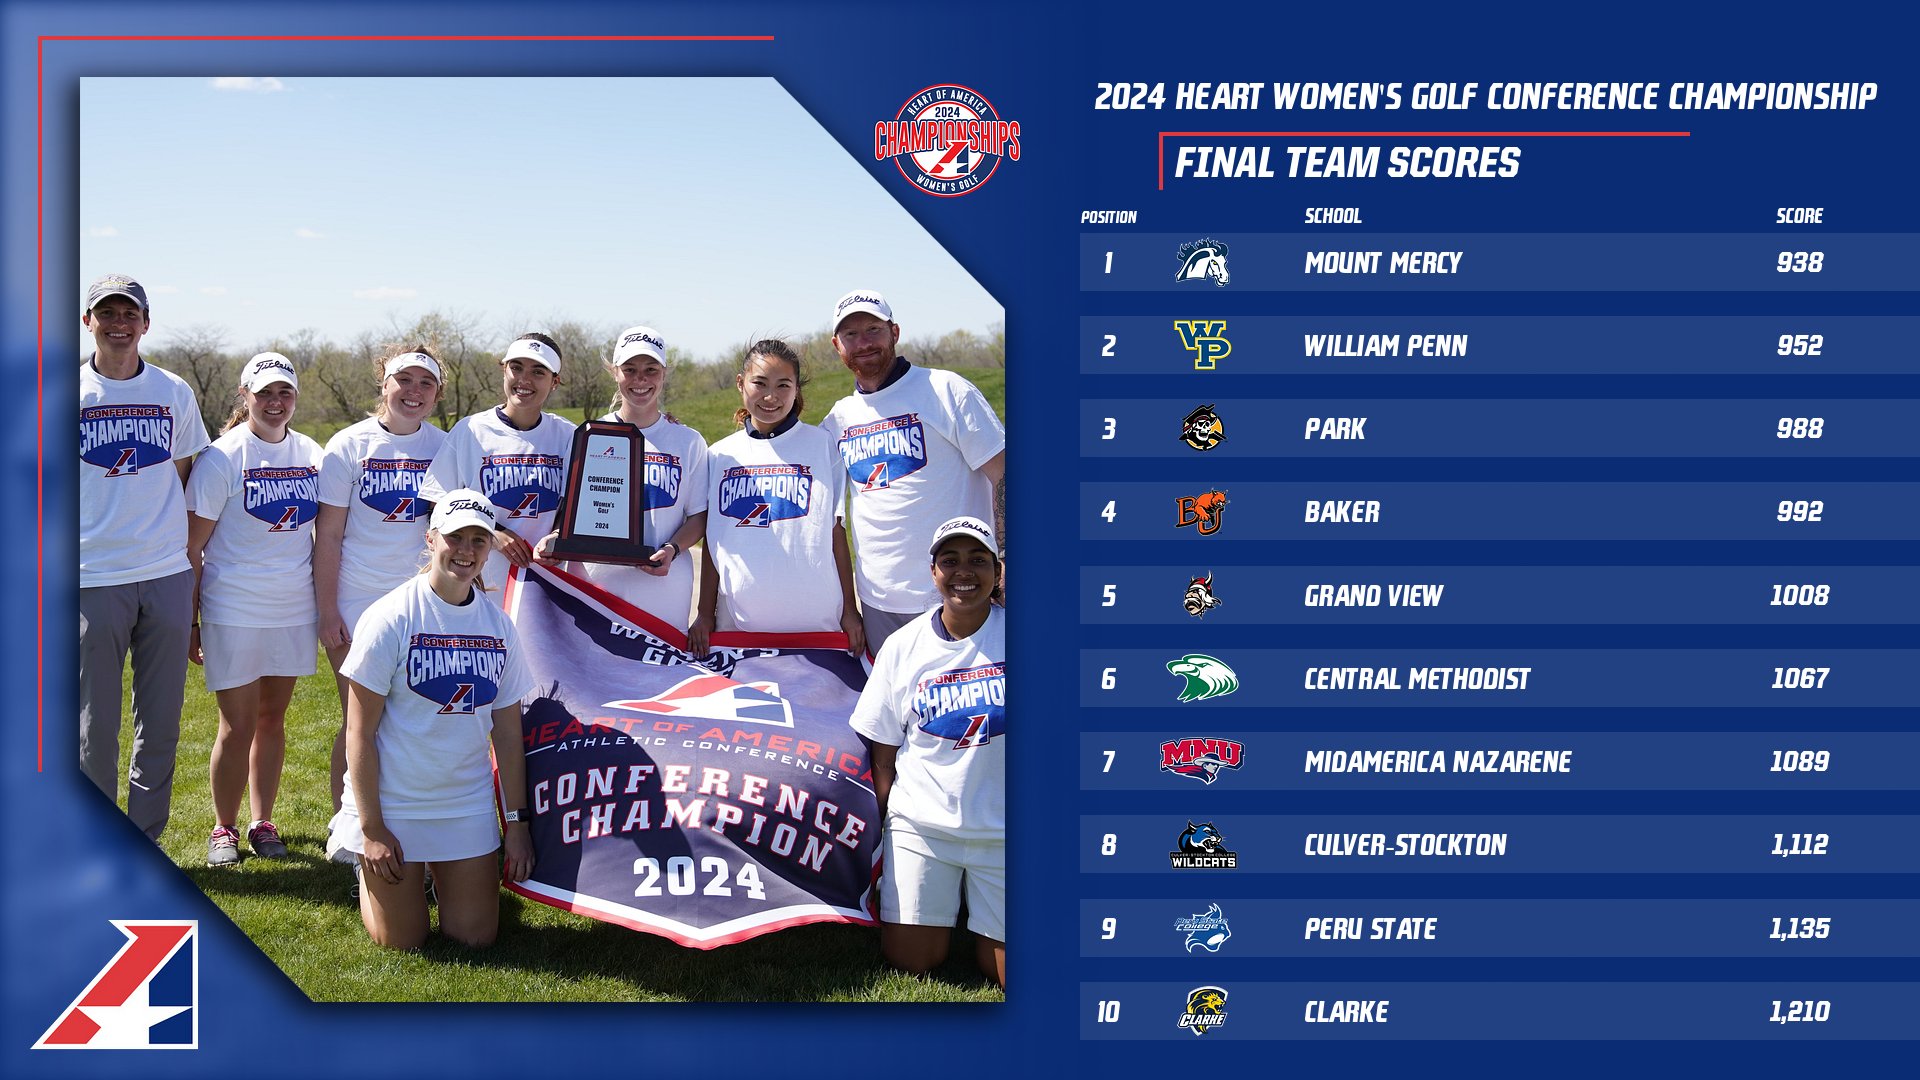 Mount Mercy University Wins First-Ever Heart Women’s Golf Conference Championship